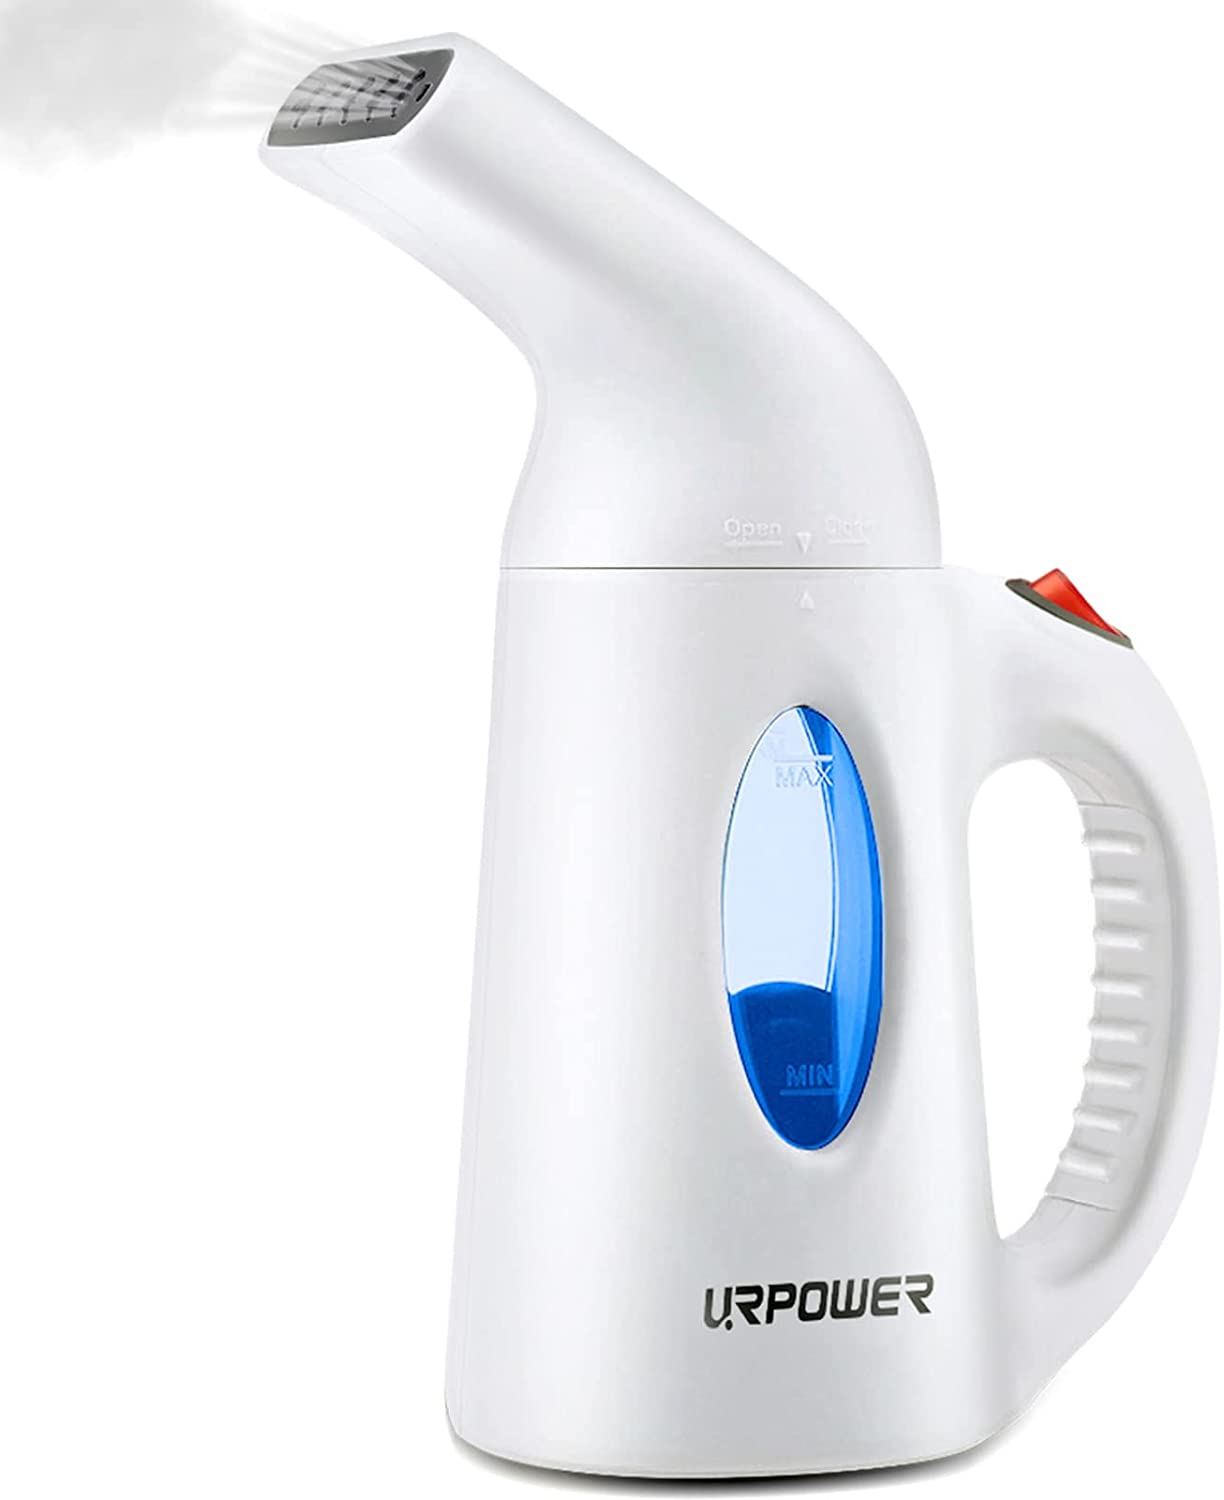 URPOWER 7-In-1 Portable Fabric Steamer